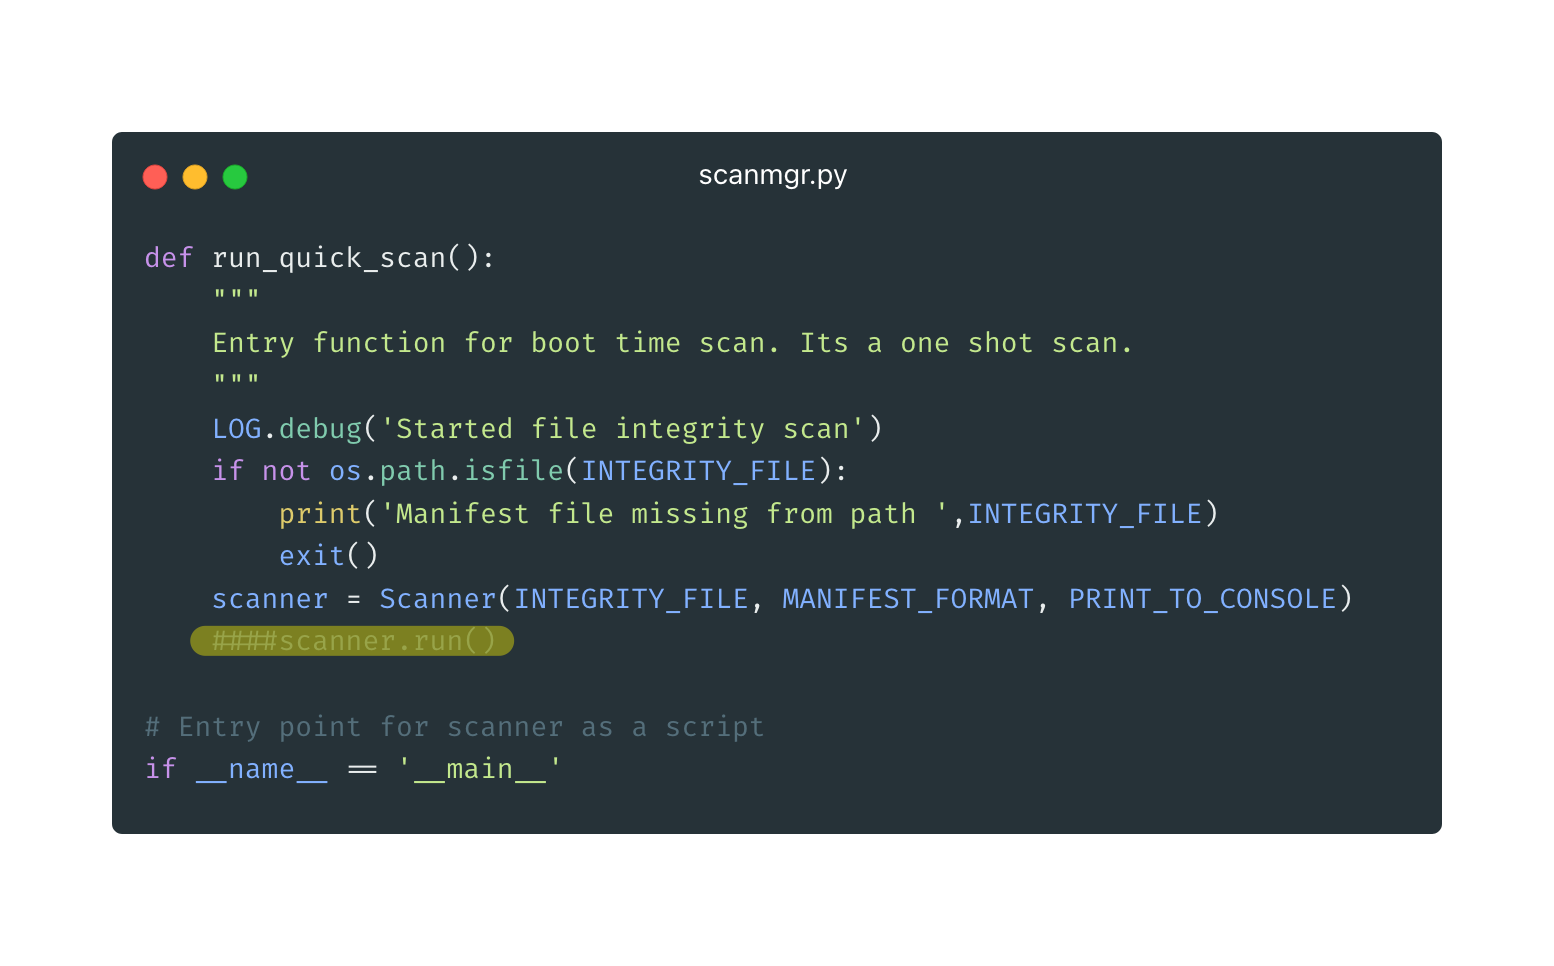 Scanner execution commented out in scanmgr.py